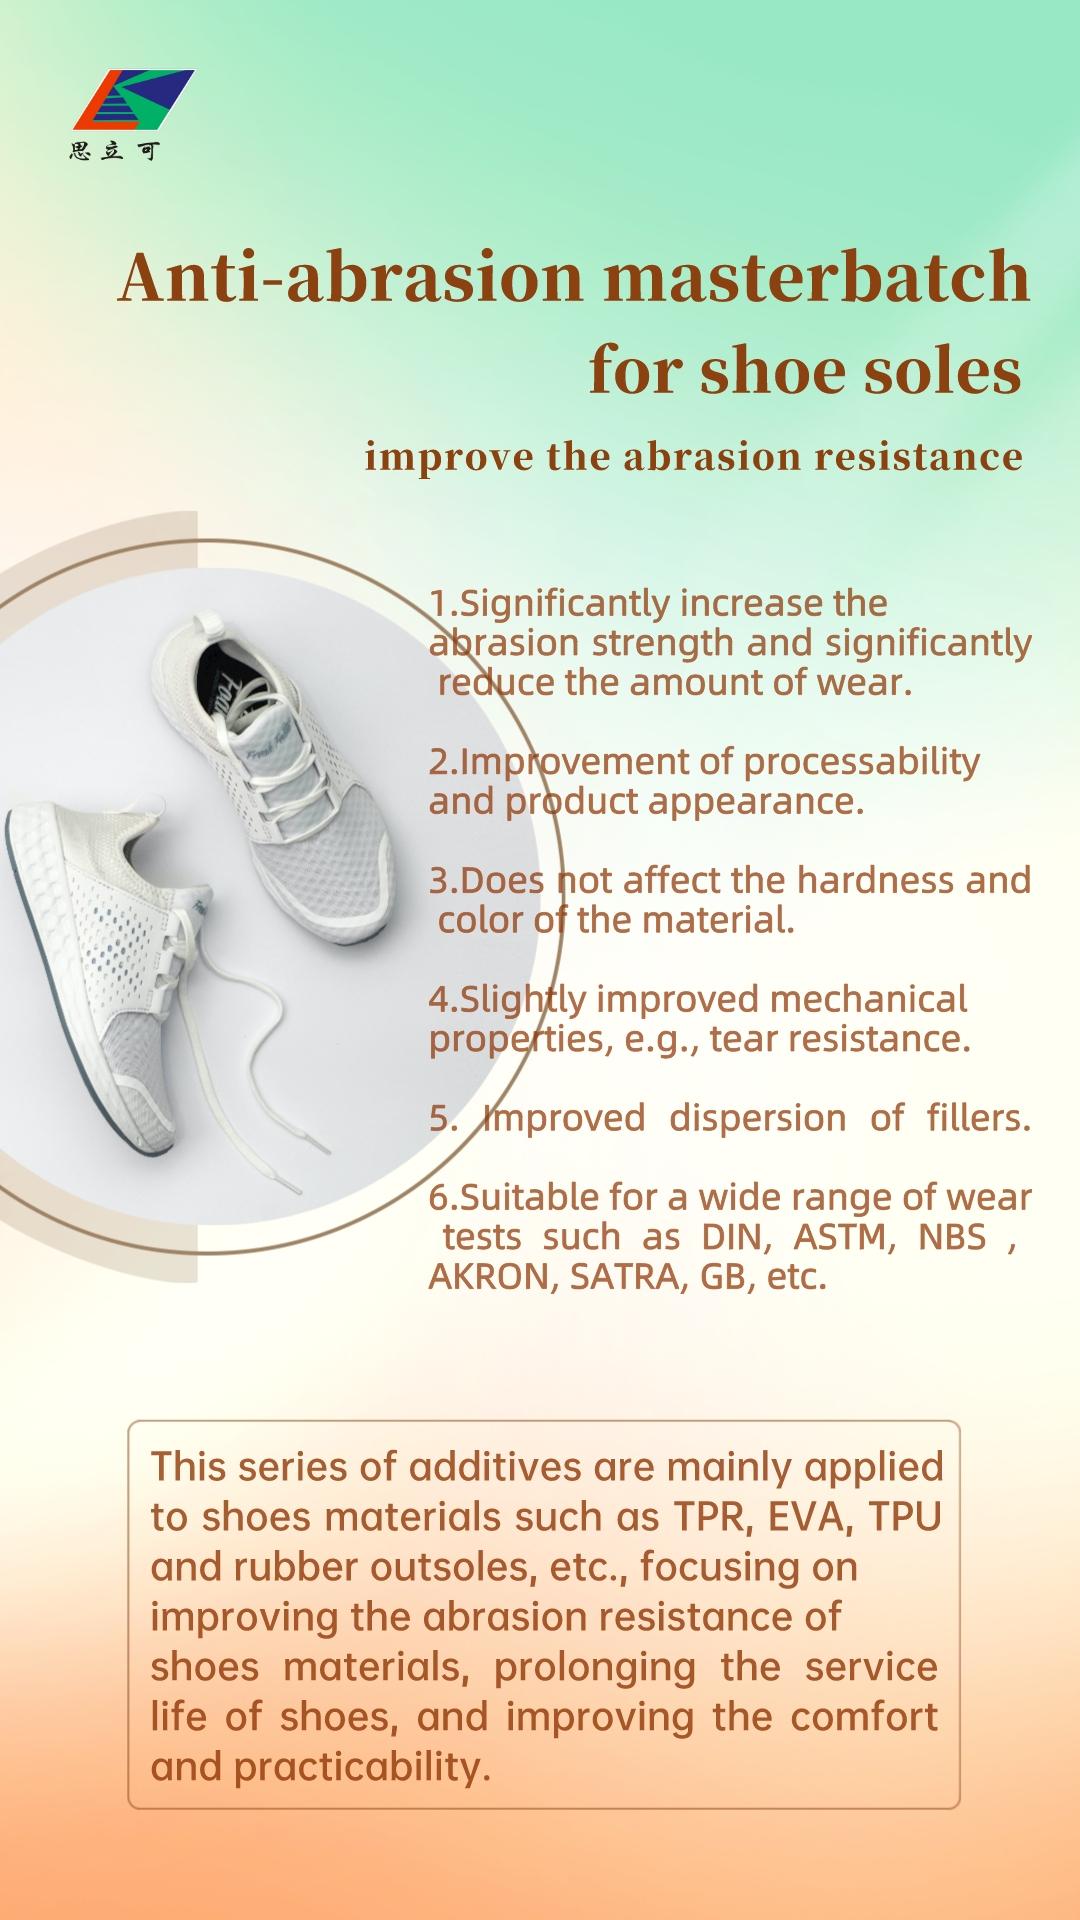 How to improve the abrasion resistance of shoe soles.